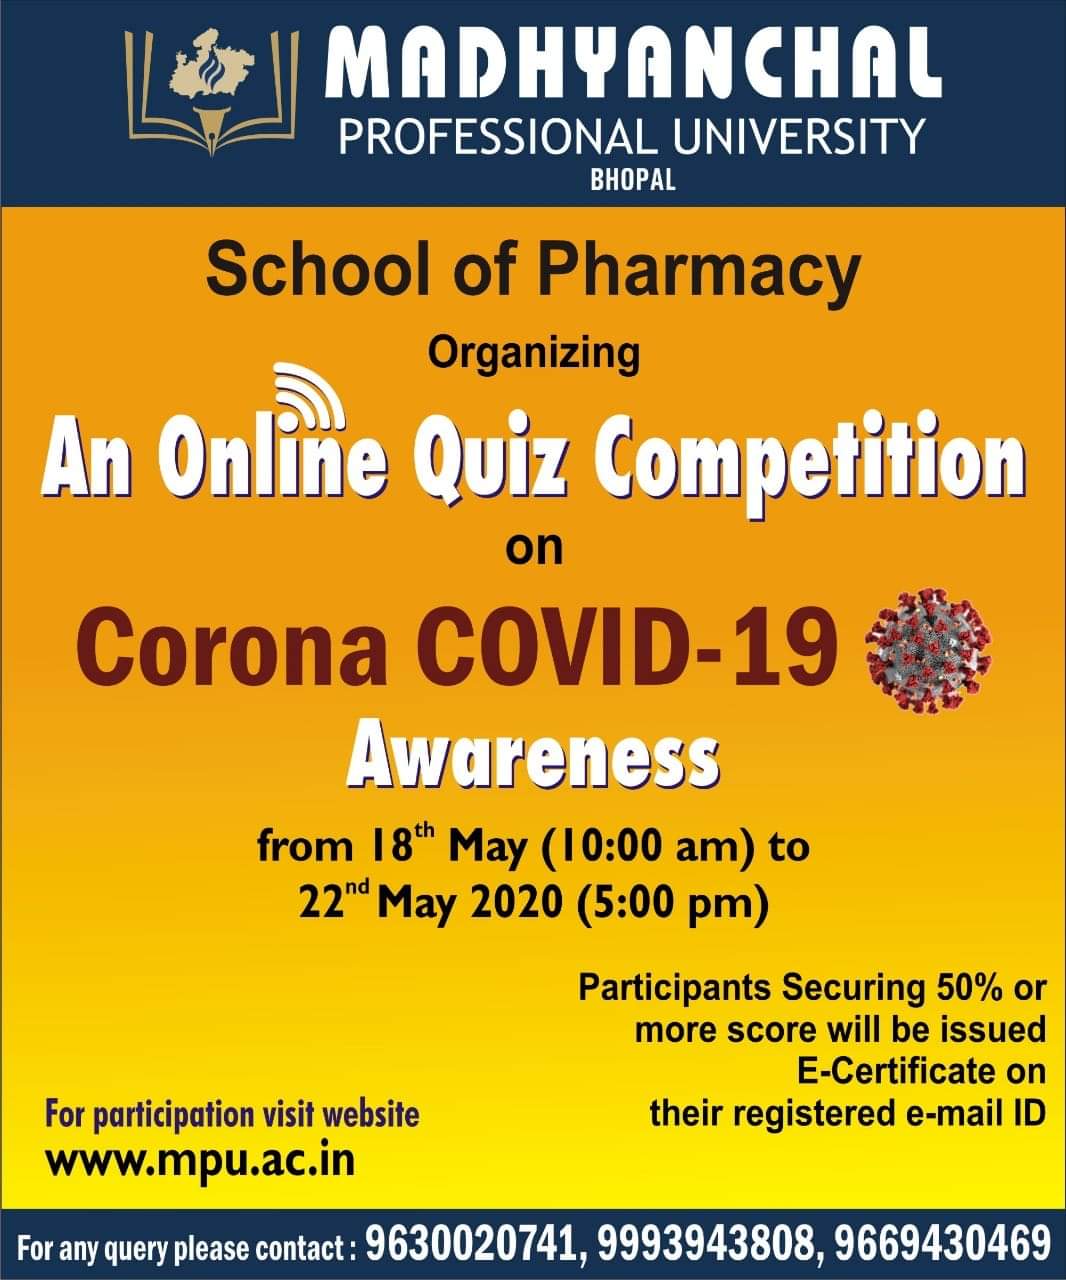 An Online Quiz Competition on Corona COVID-19 Awareness